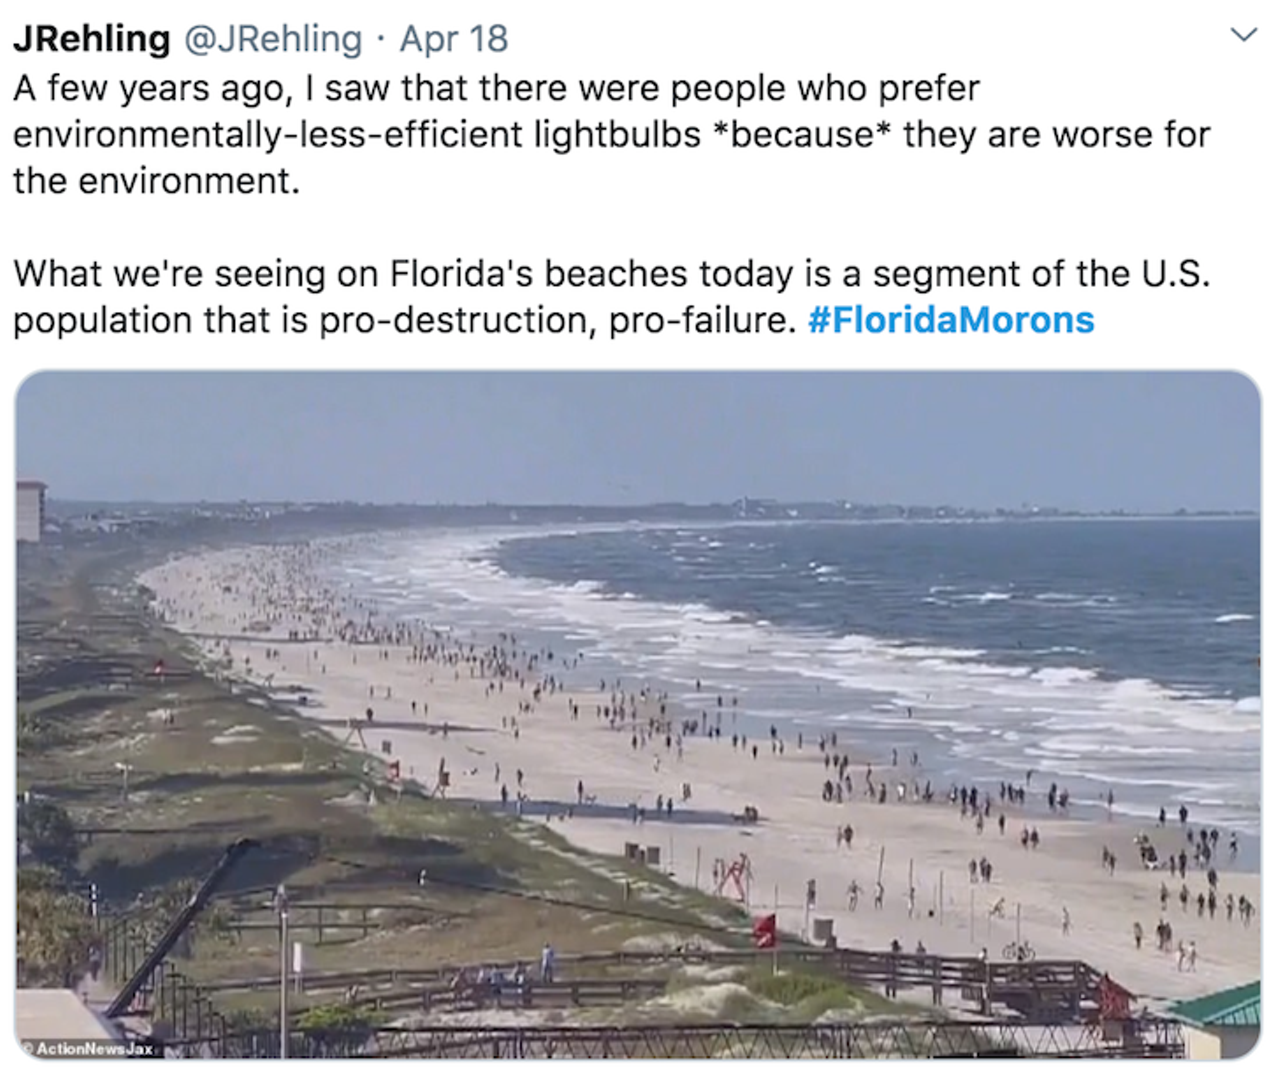 When Florida opened its beaches, it also opened up the #FloridaMorons hashtag